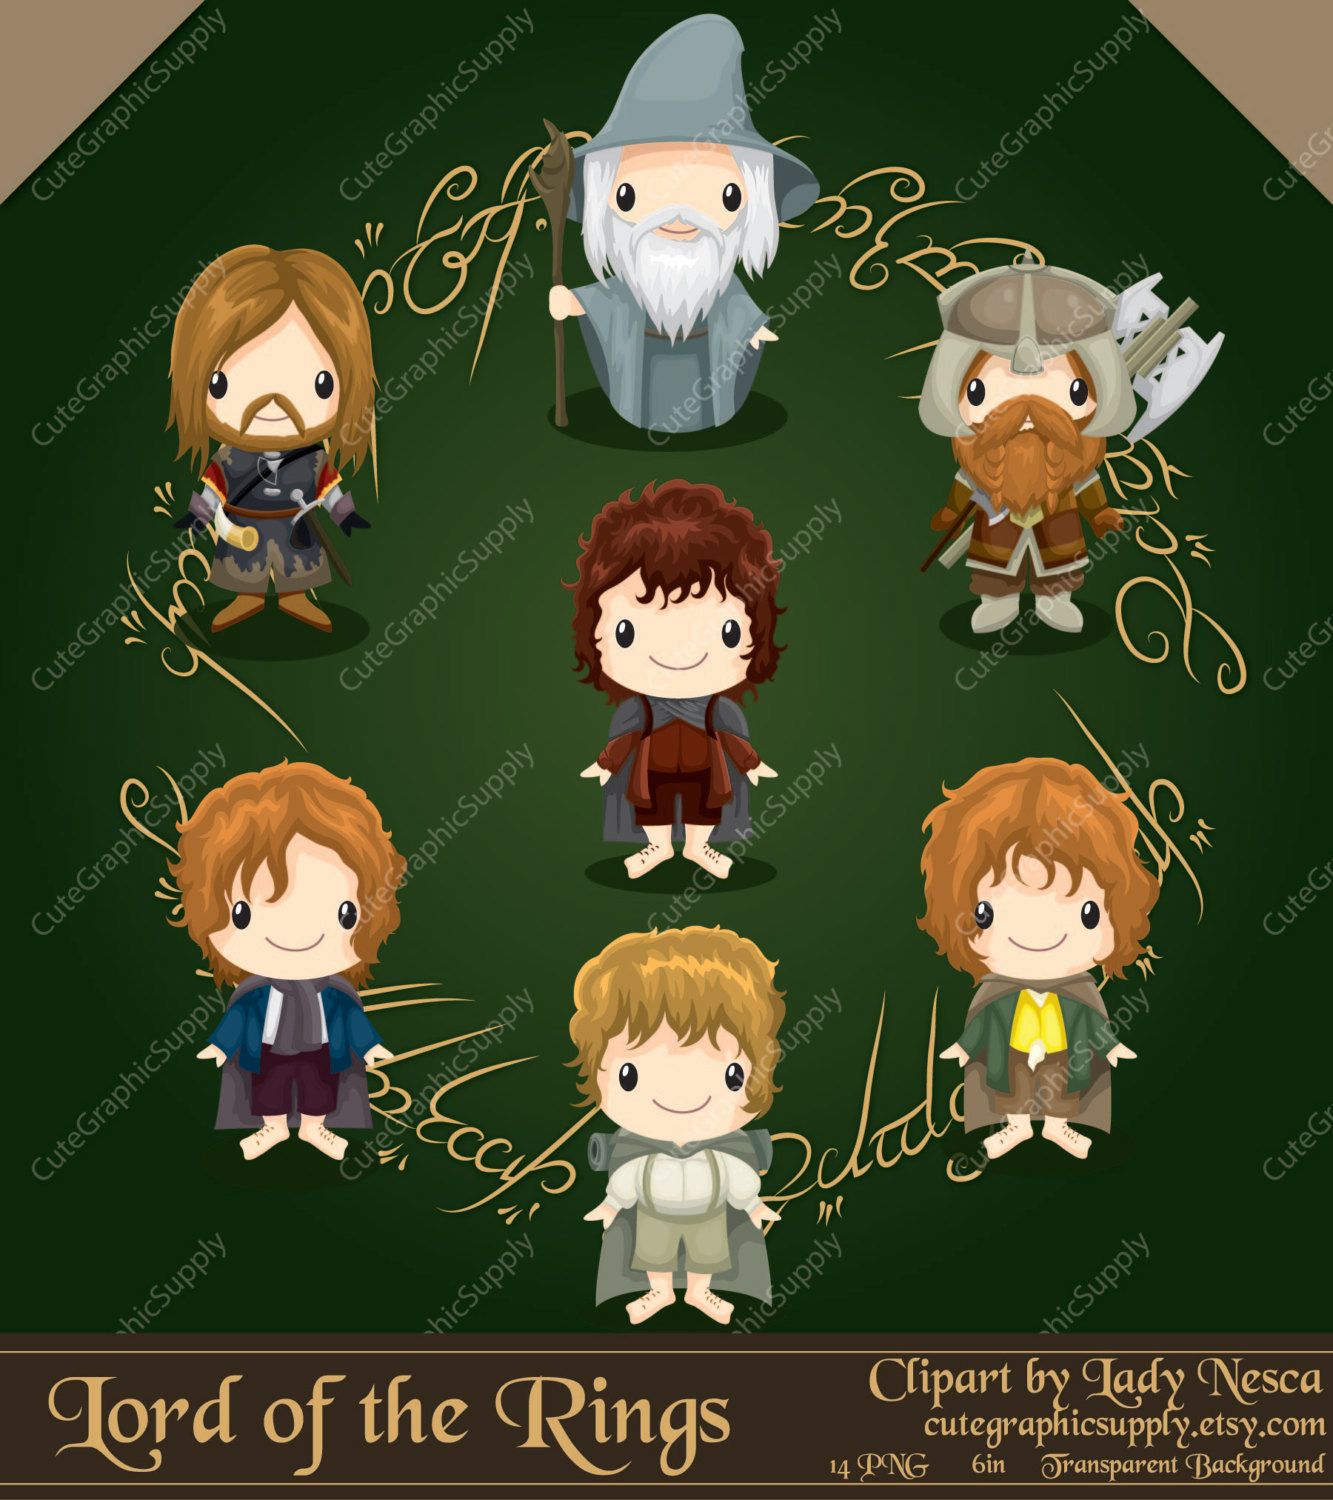 Lord of the Rings inspired clipart, hobbit clipart, elf clipart,  fellowship, Lord of the Rings, LOTR clipart -LN090-